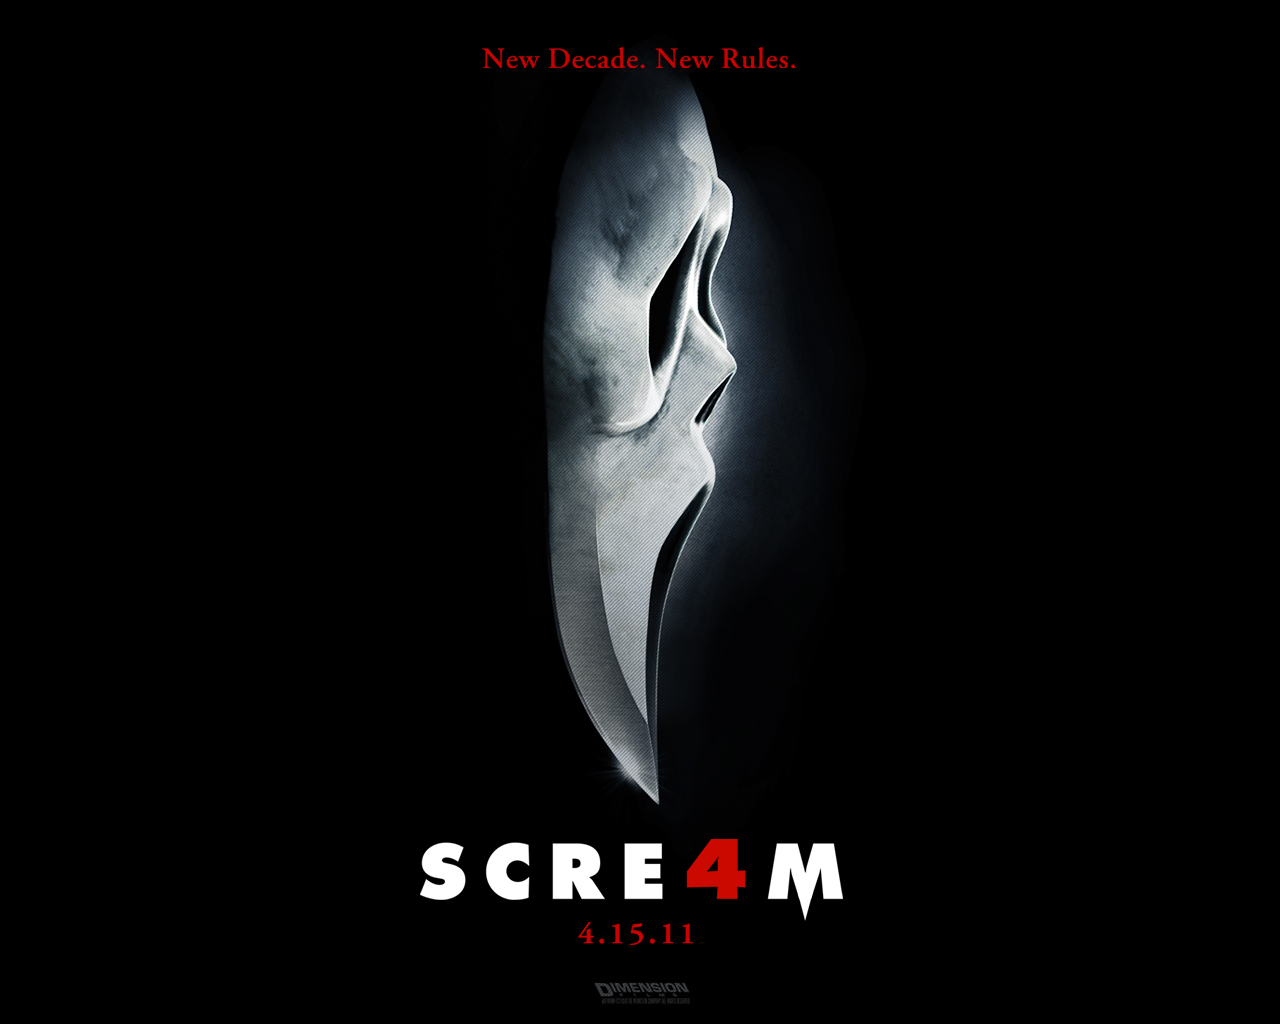 Hello Wele To My Scream Wallpaper And Official Trailer